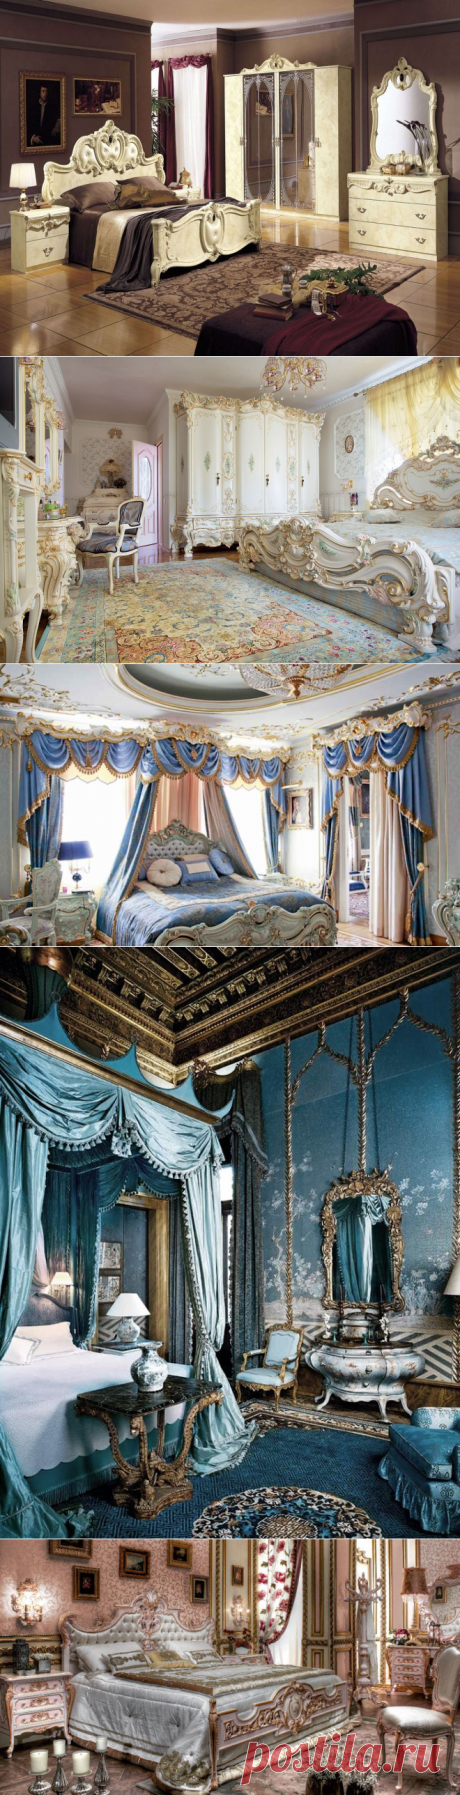 Bedrooms in the Rococo Style | Interior Design Pictures